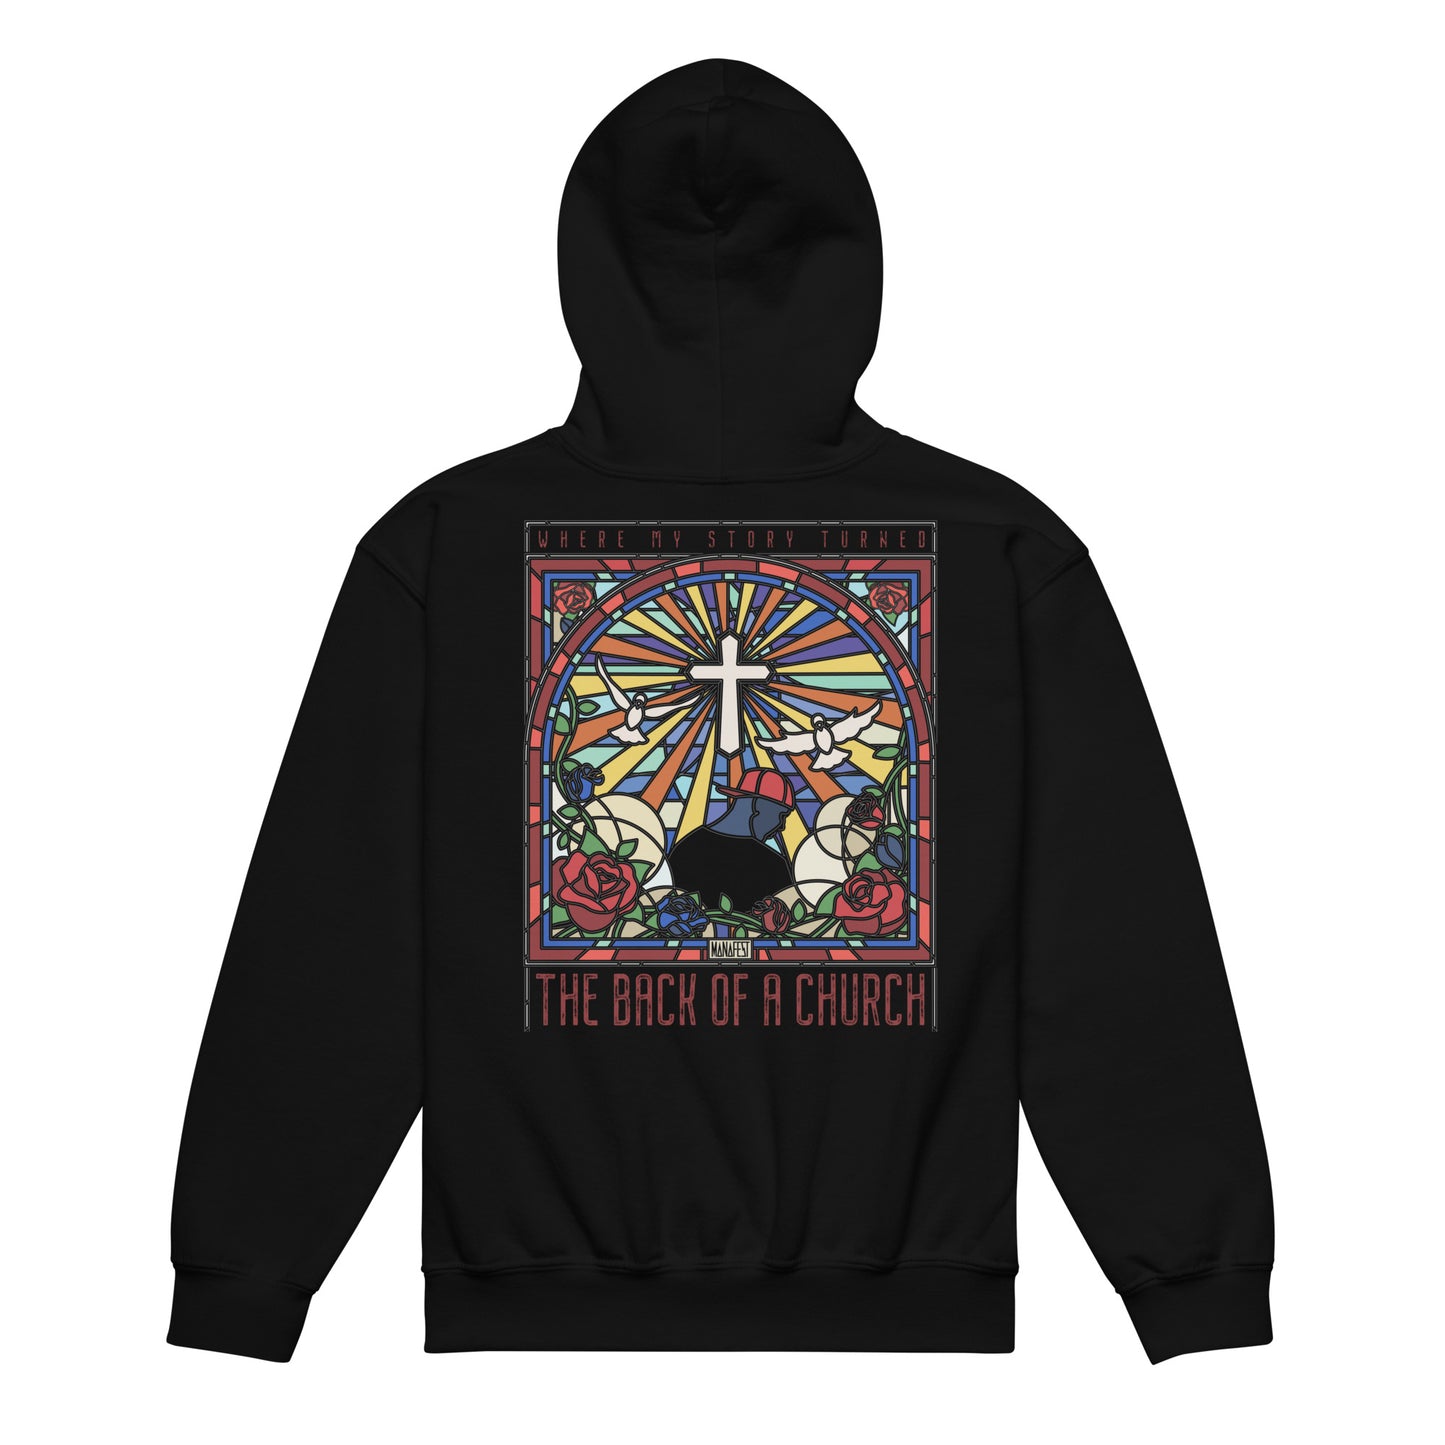 Back of a Church Youth heavy blend hoodie